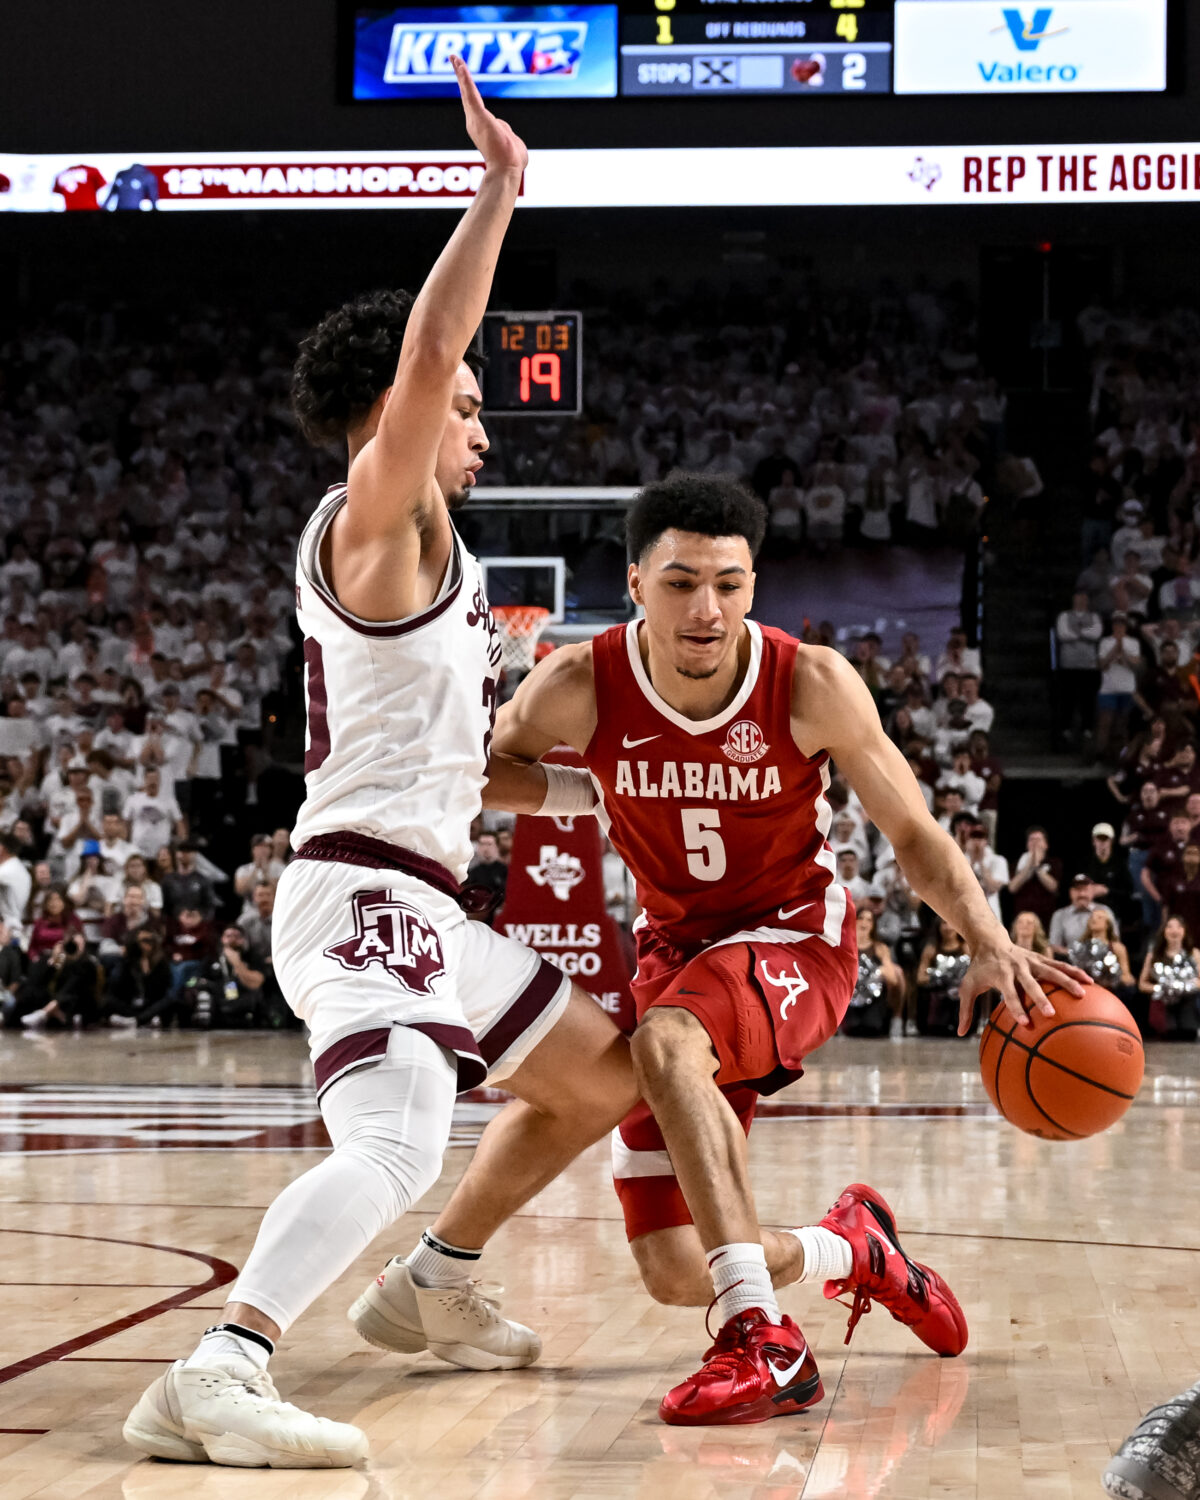 Alabama G Jahvon Quinerly will enter the transfer portal – Could Texas A&M be in play?